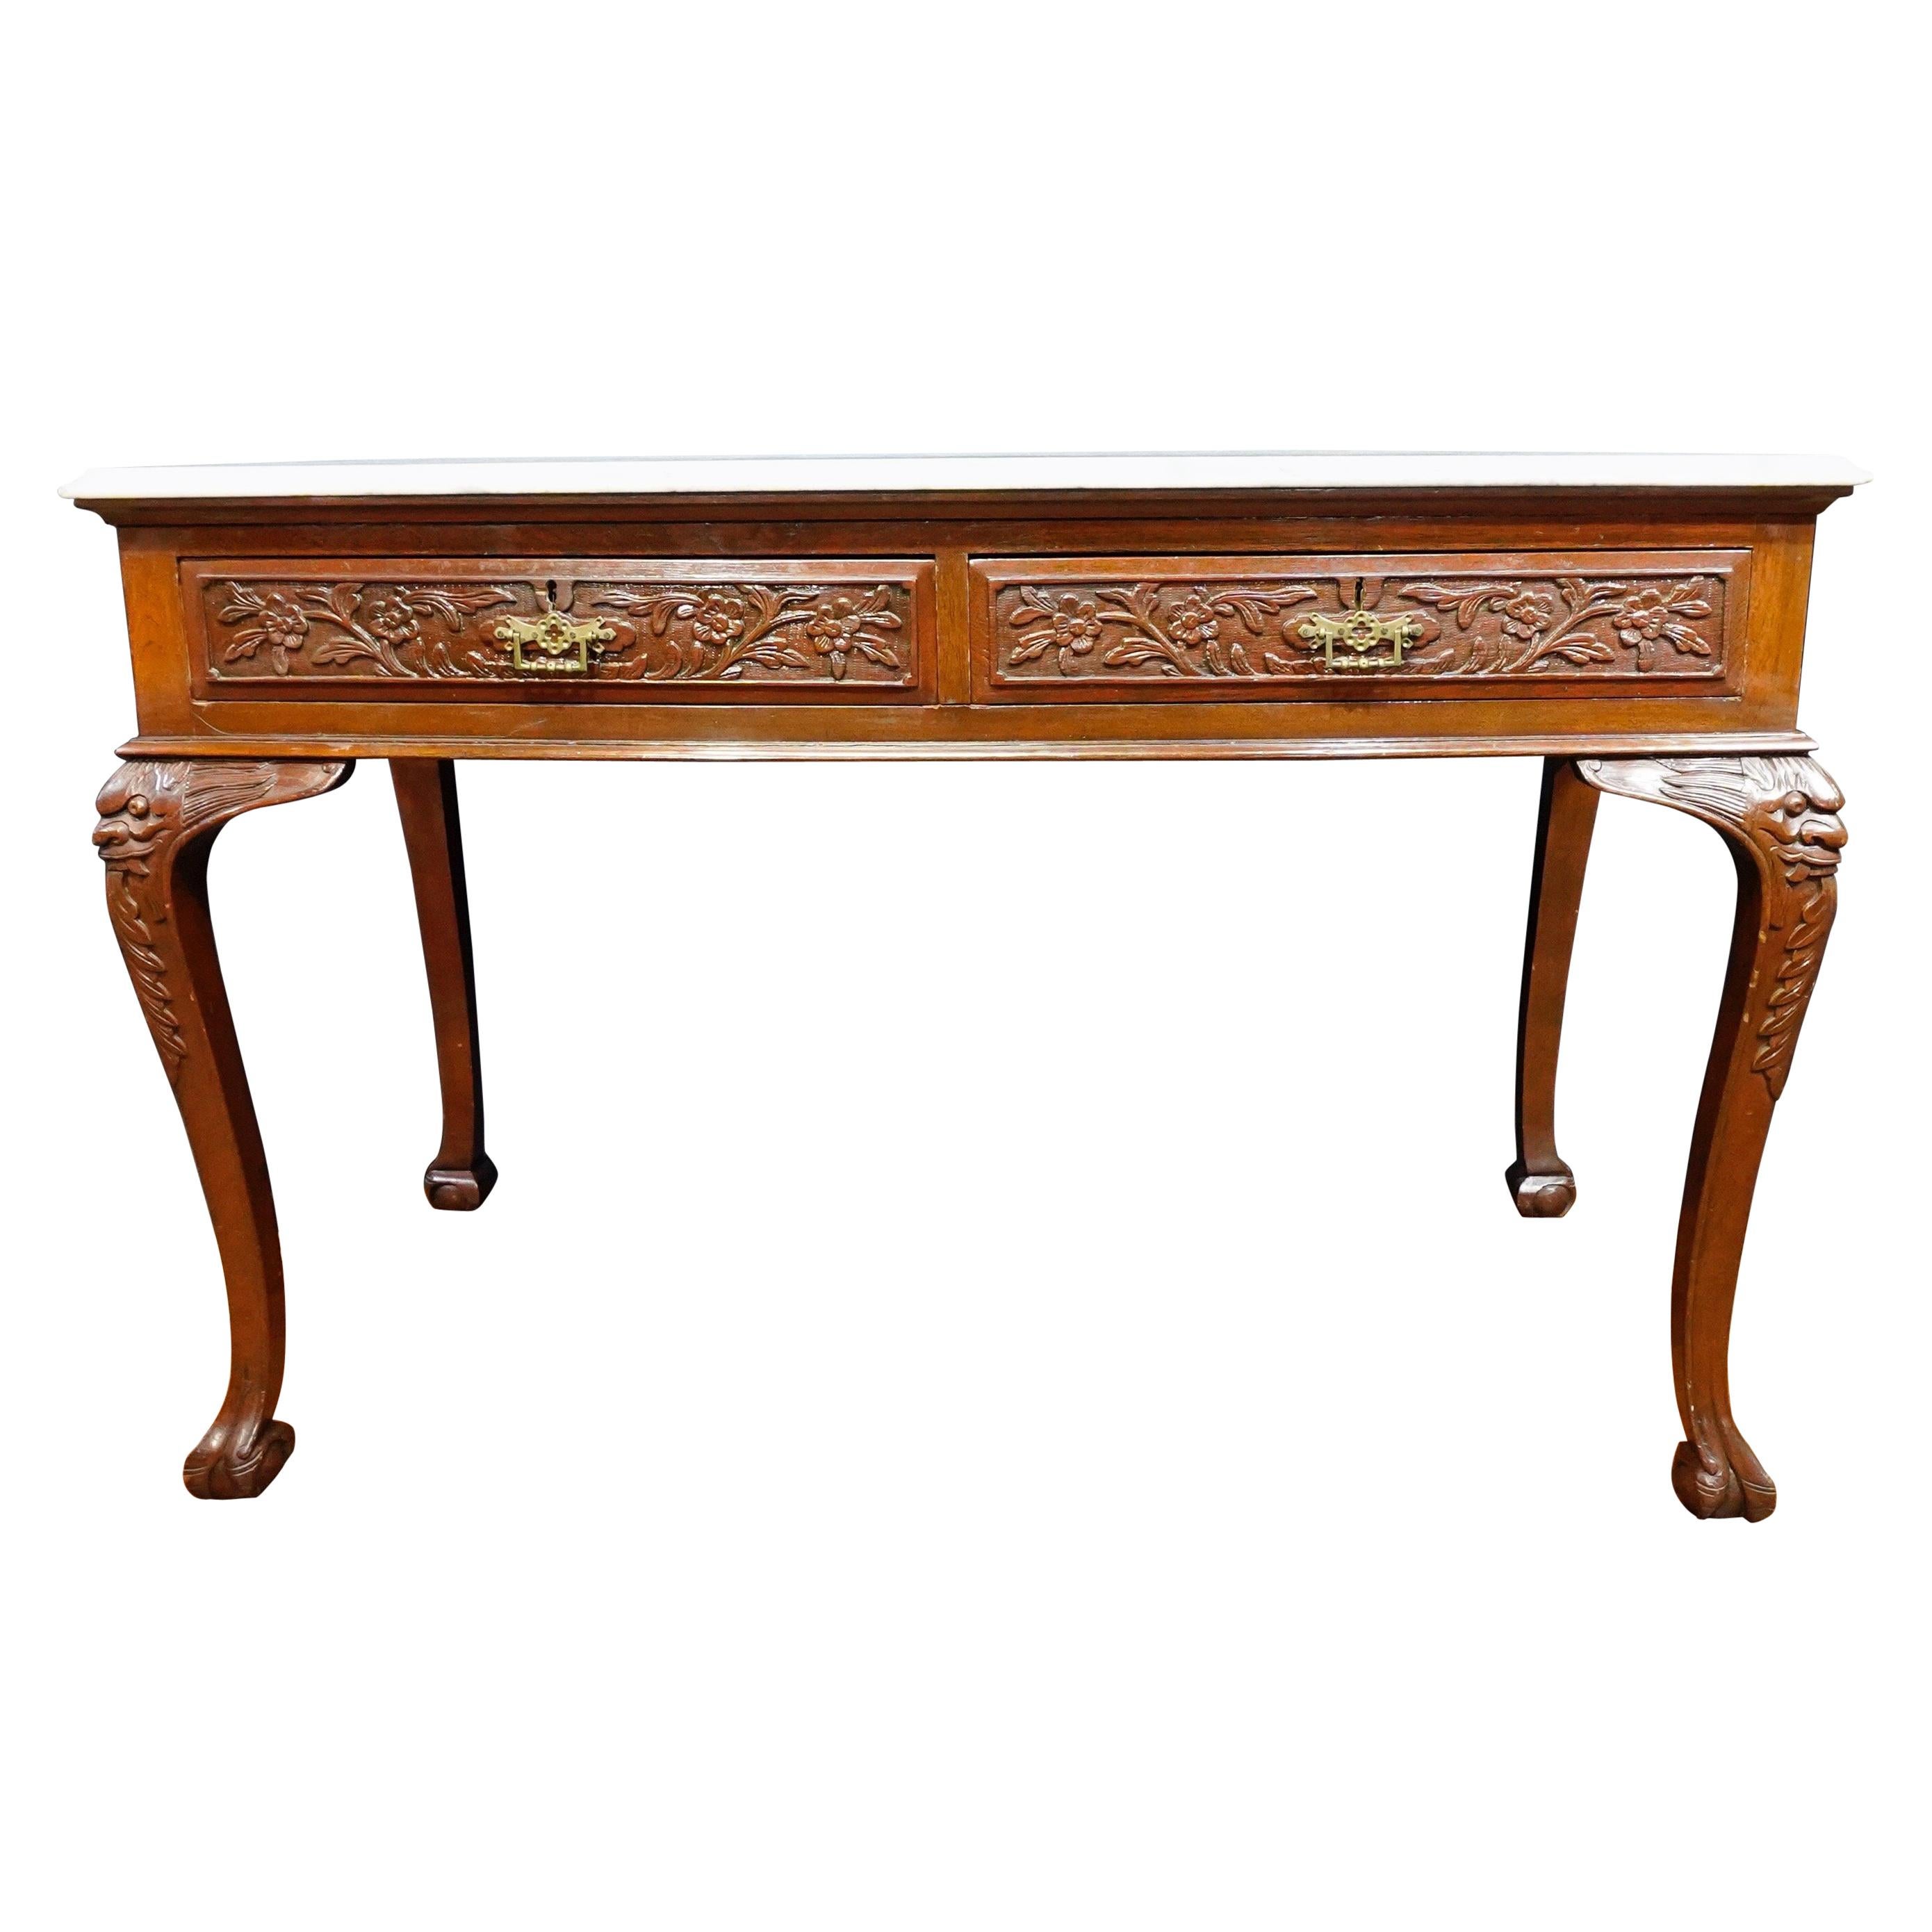 Victorian Malacca Hall Table Dragon Legs & Marble Top Chinese Export, circa 1920